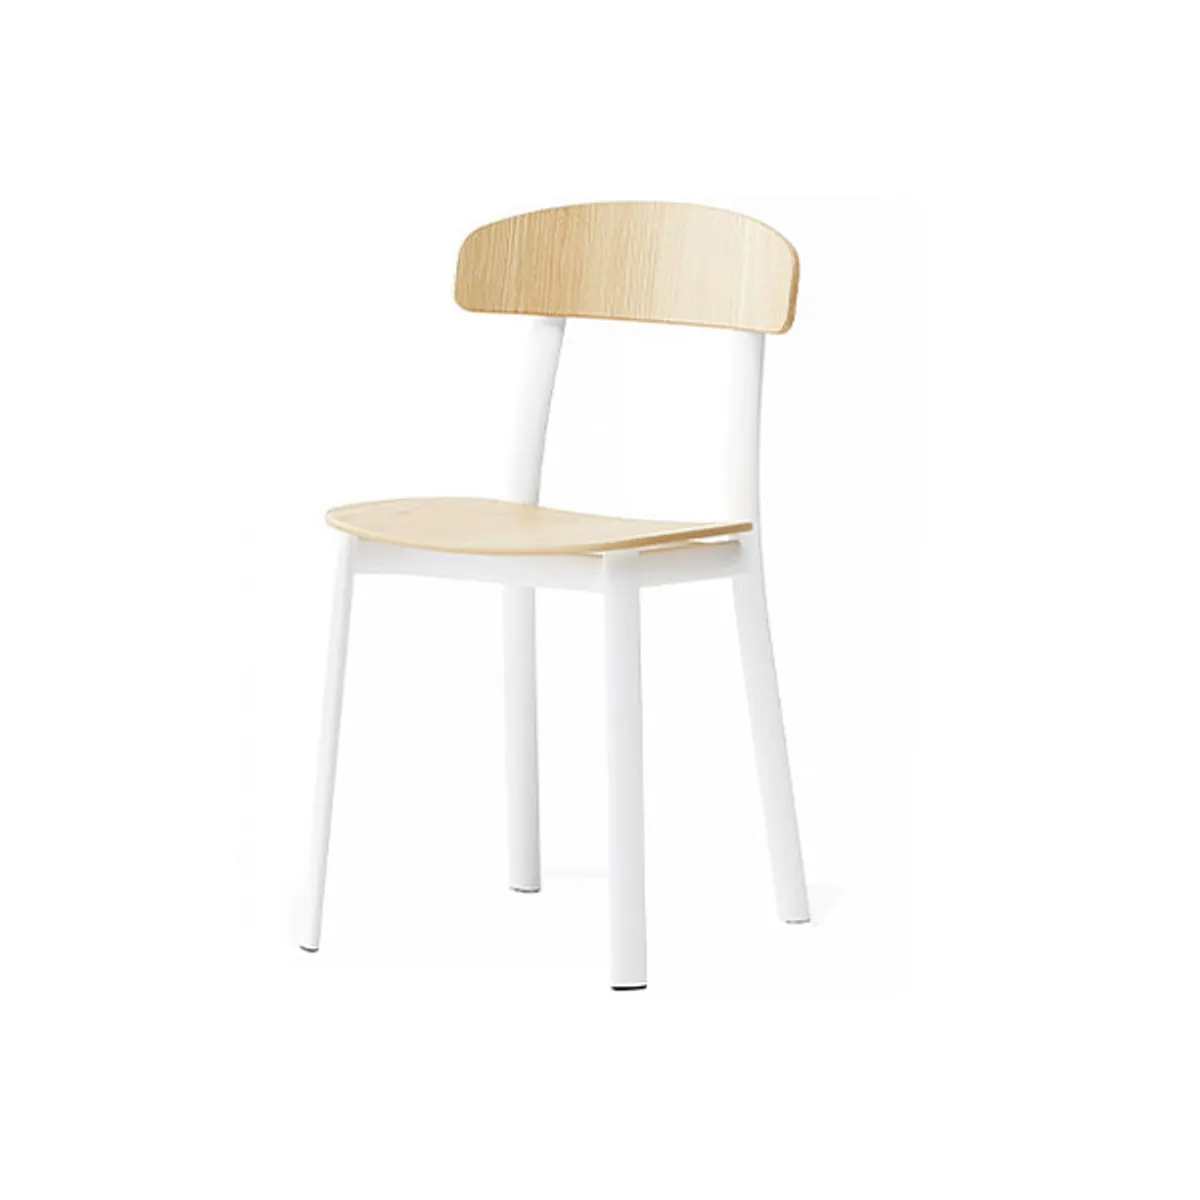 Kipling White Metal Ash Plywood Chair Inside Out Contracts